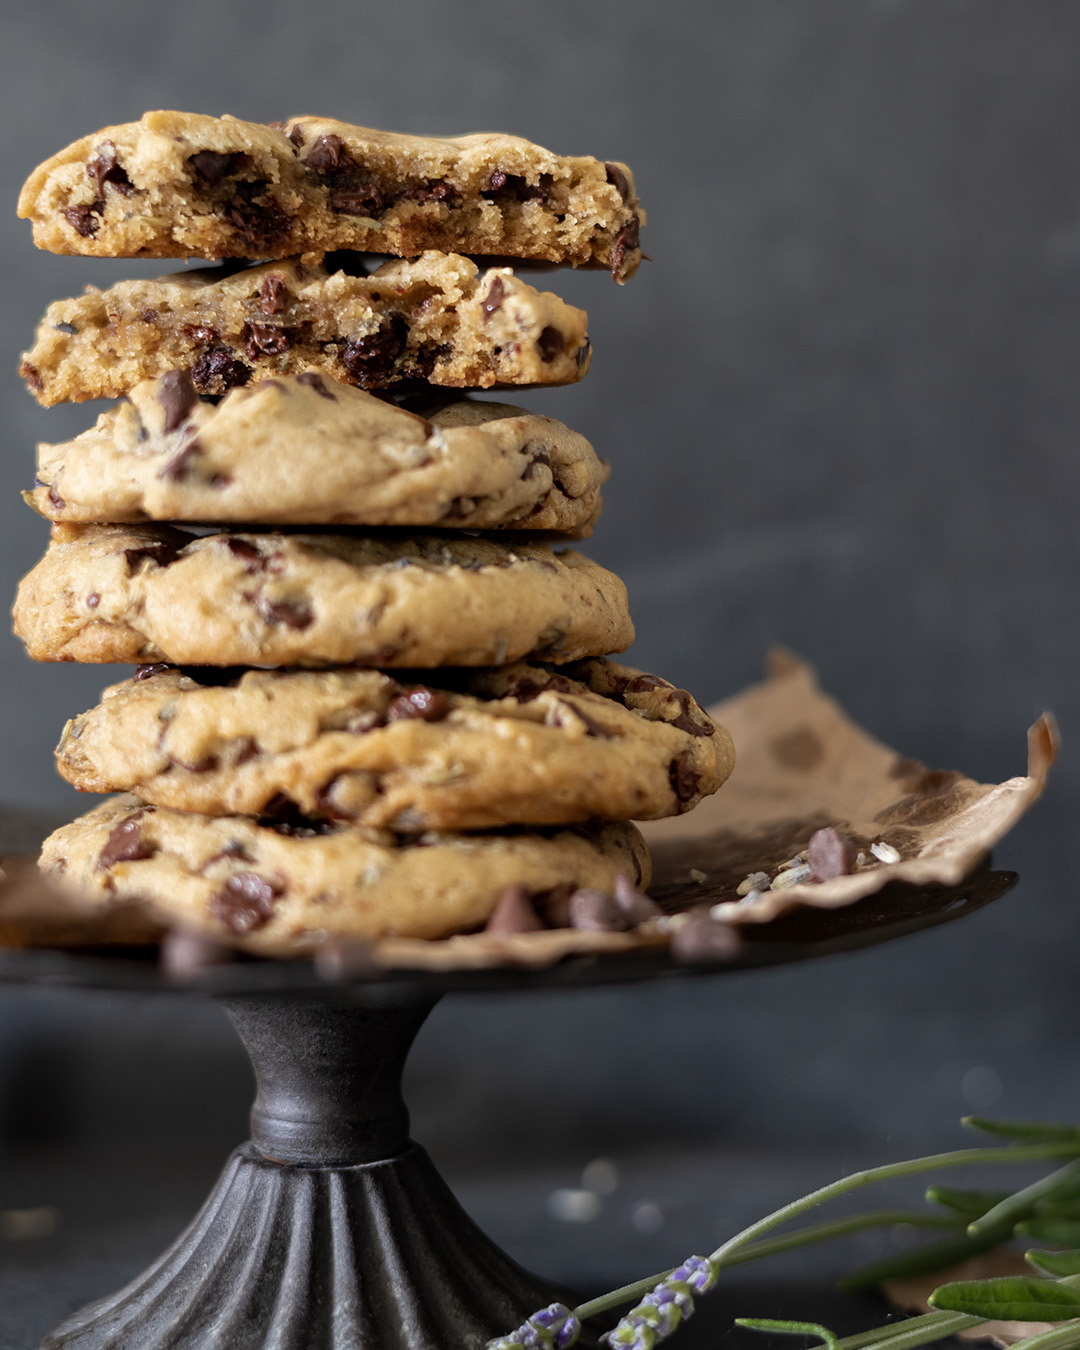 These lavender chocolate chip cookies are a bit of a fancy, unexpected variation on the classic chocolate chip cookie. Perfect for special summer get-togethers or to elevate your afternoon iced coffee break.